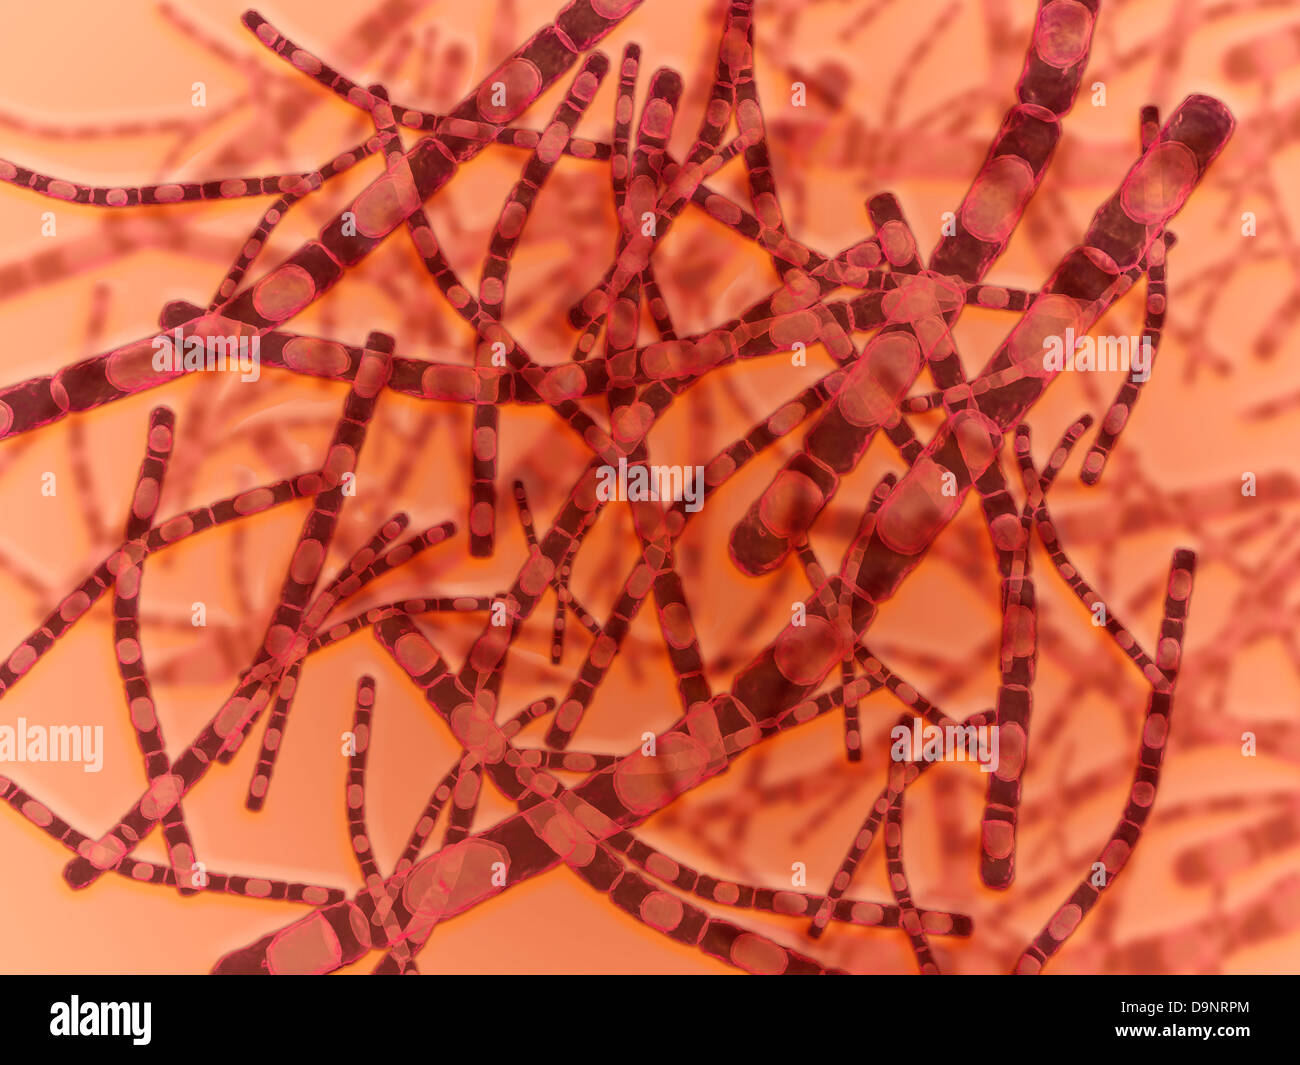 Microscopic view of Anthrax Stock Photo